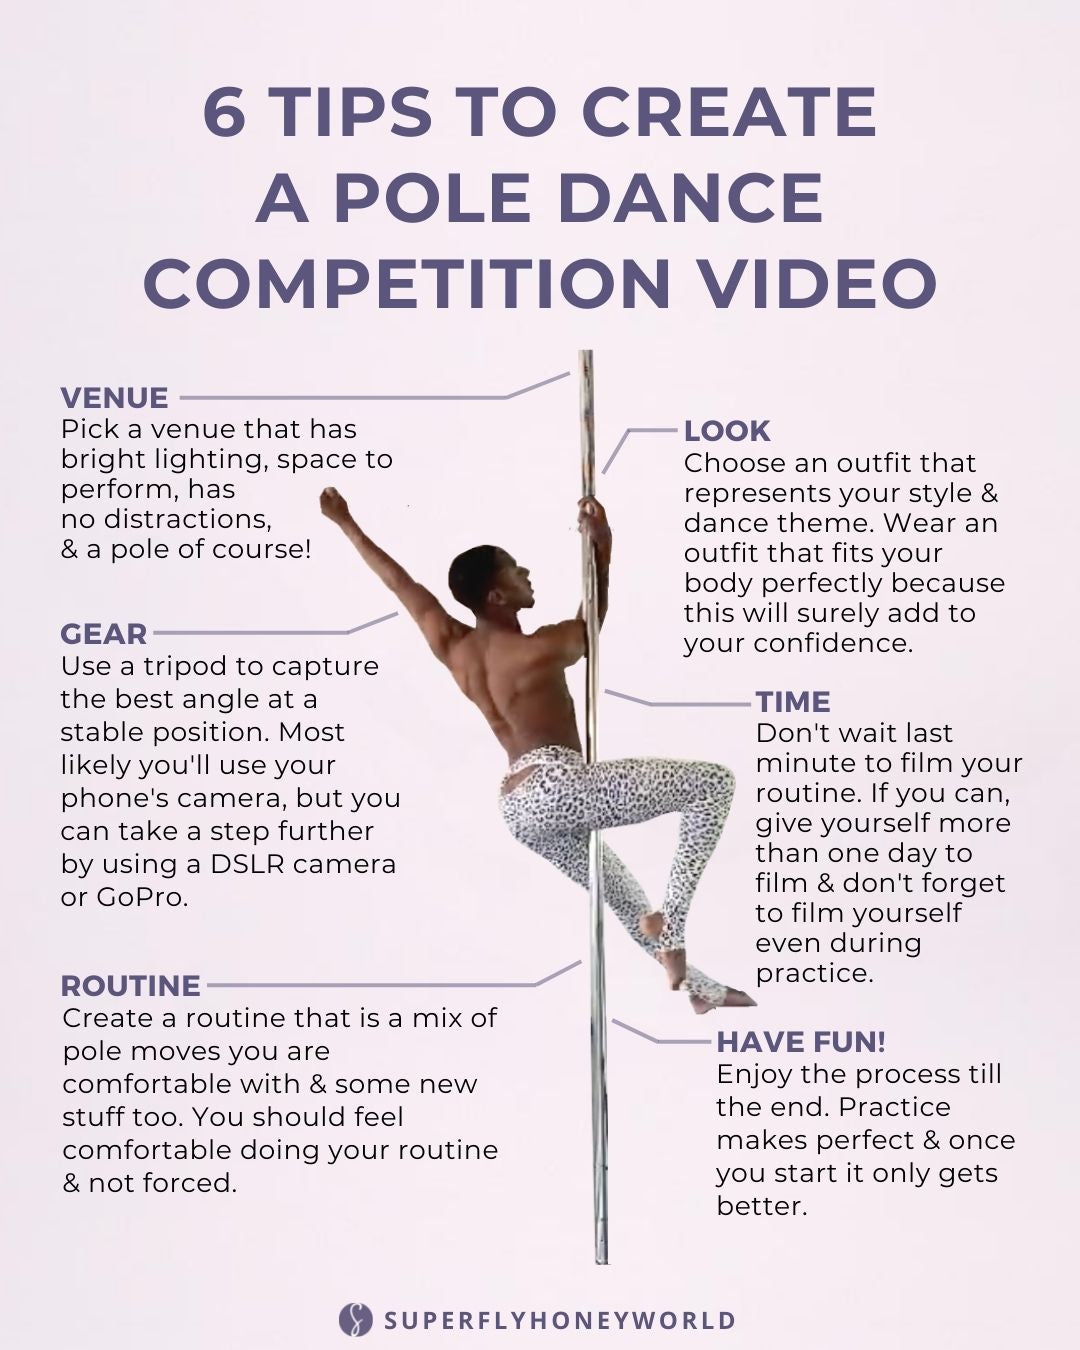 A guide to tips on how to create a pole dance competition video with a photo of a black male pole dancer in the middle wearing Super Fly Honey sticky leopard leggings in black and white.